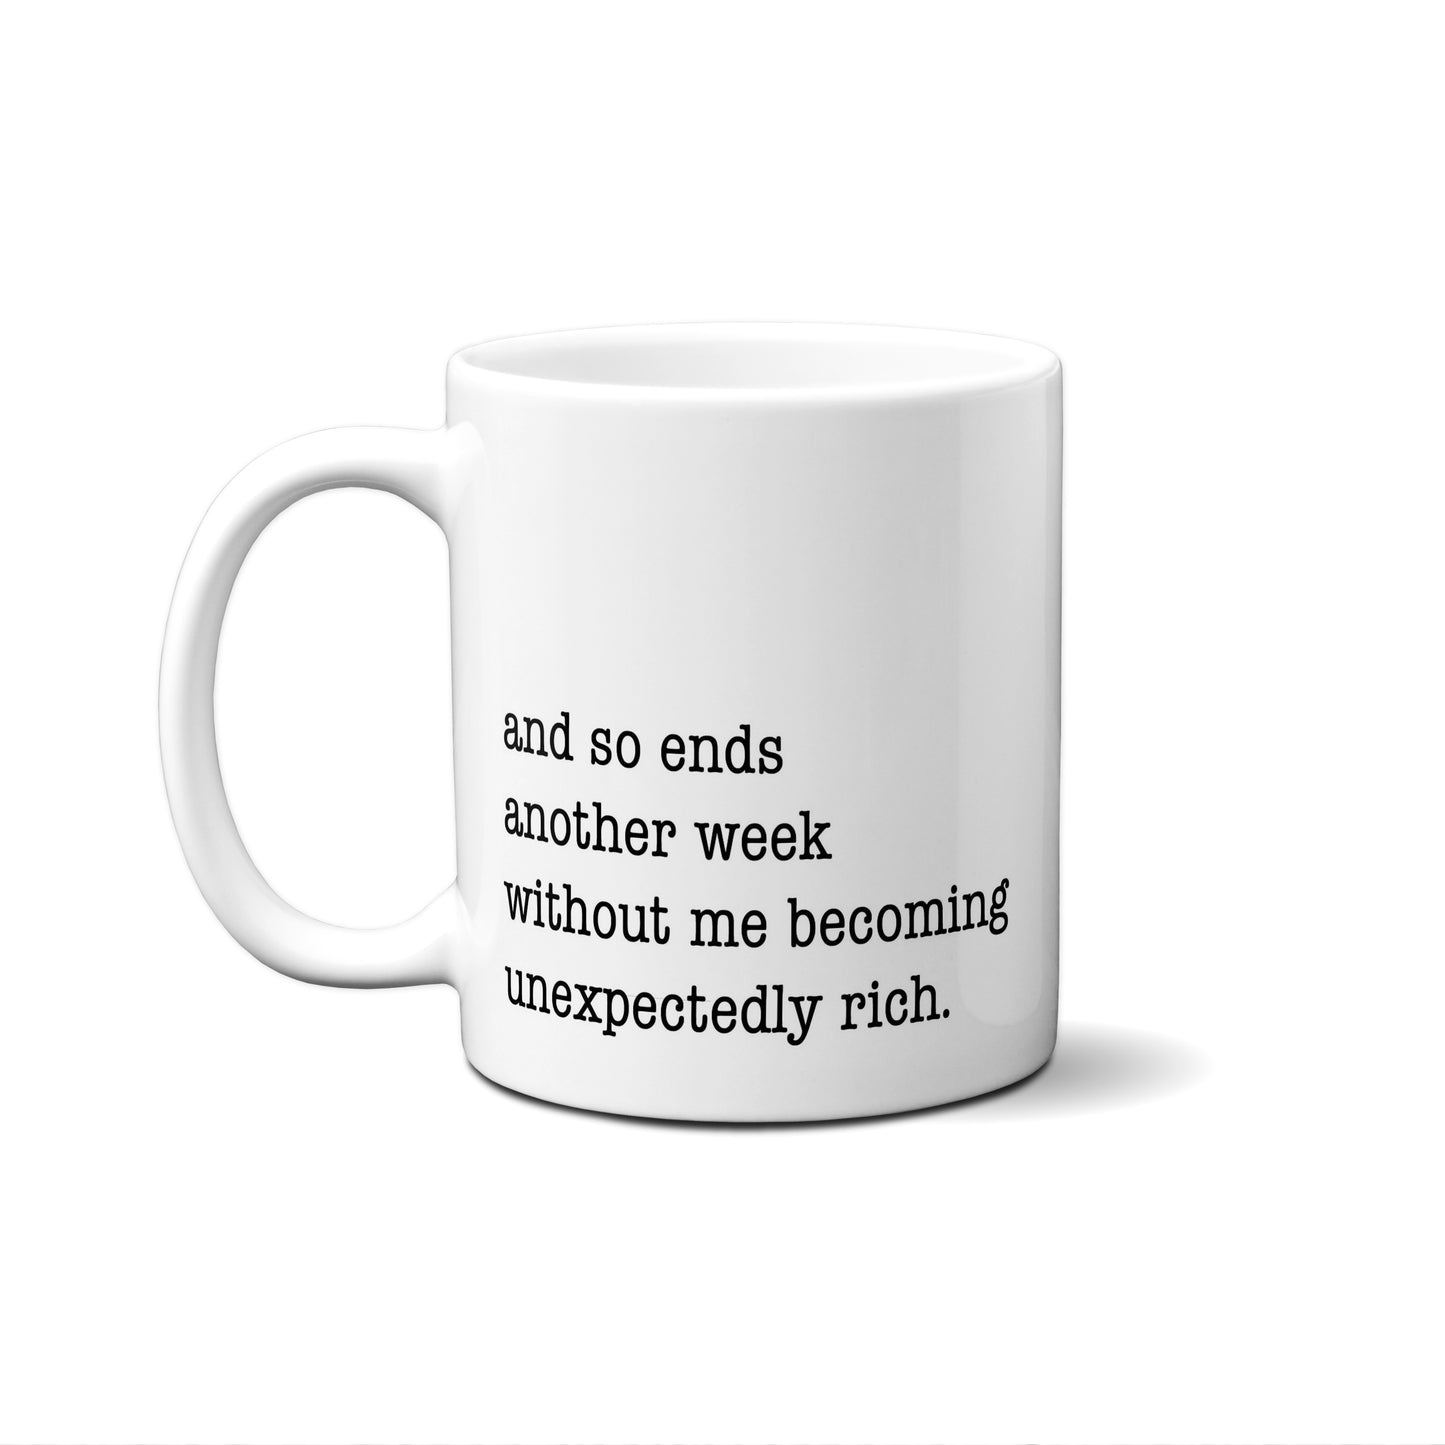 And So Ends Another Week Without Me Becoming Unexpectedly Rich. Quote Mug